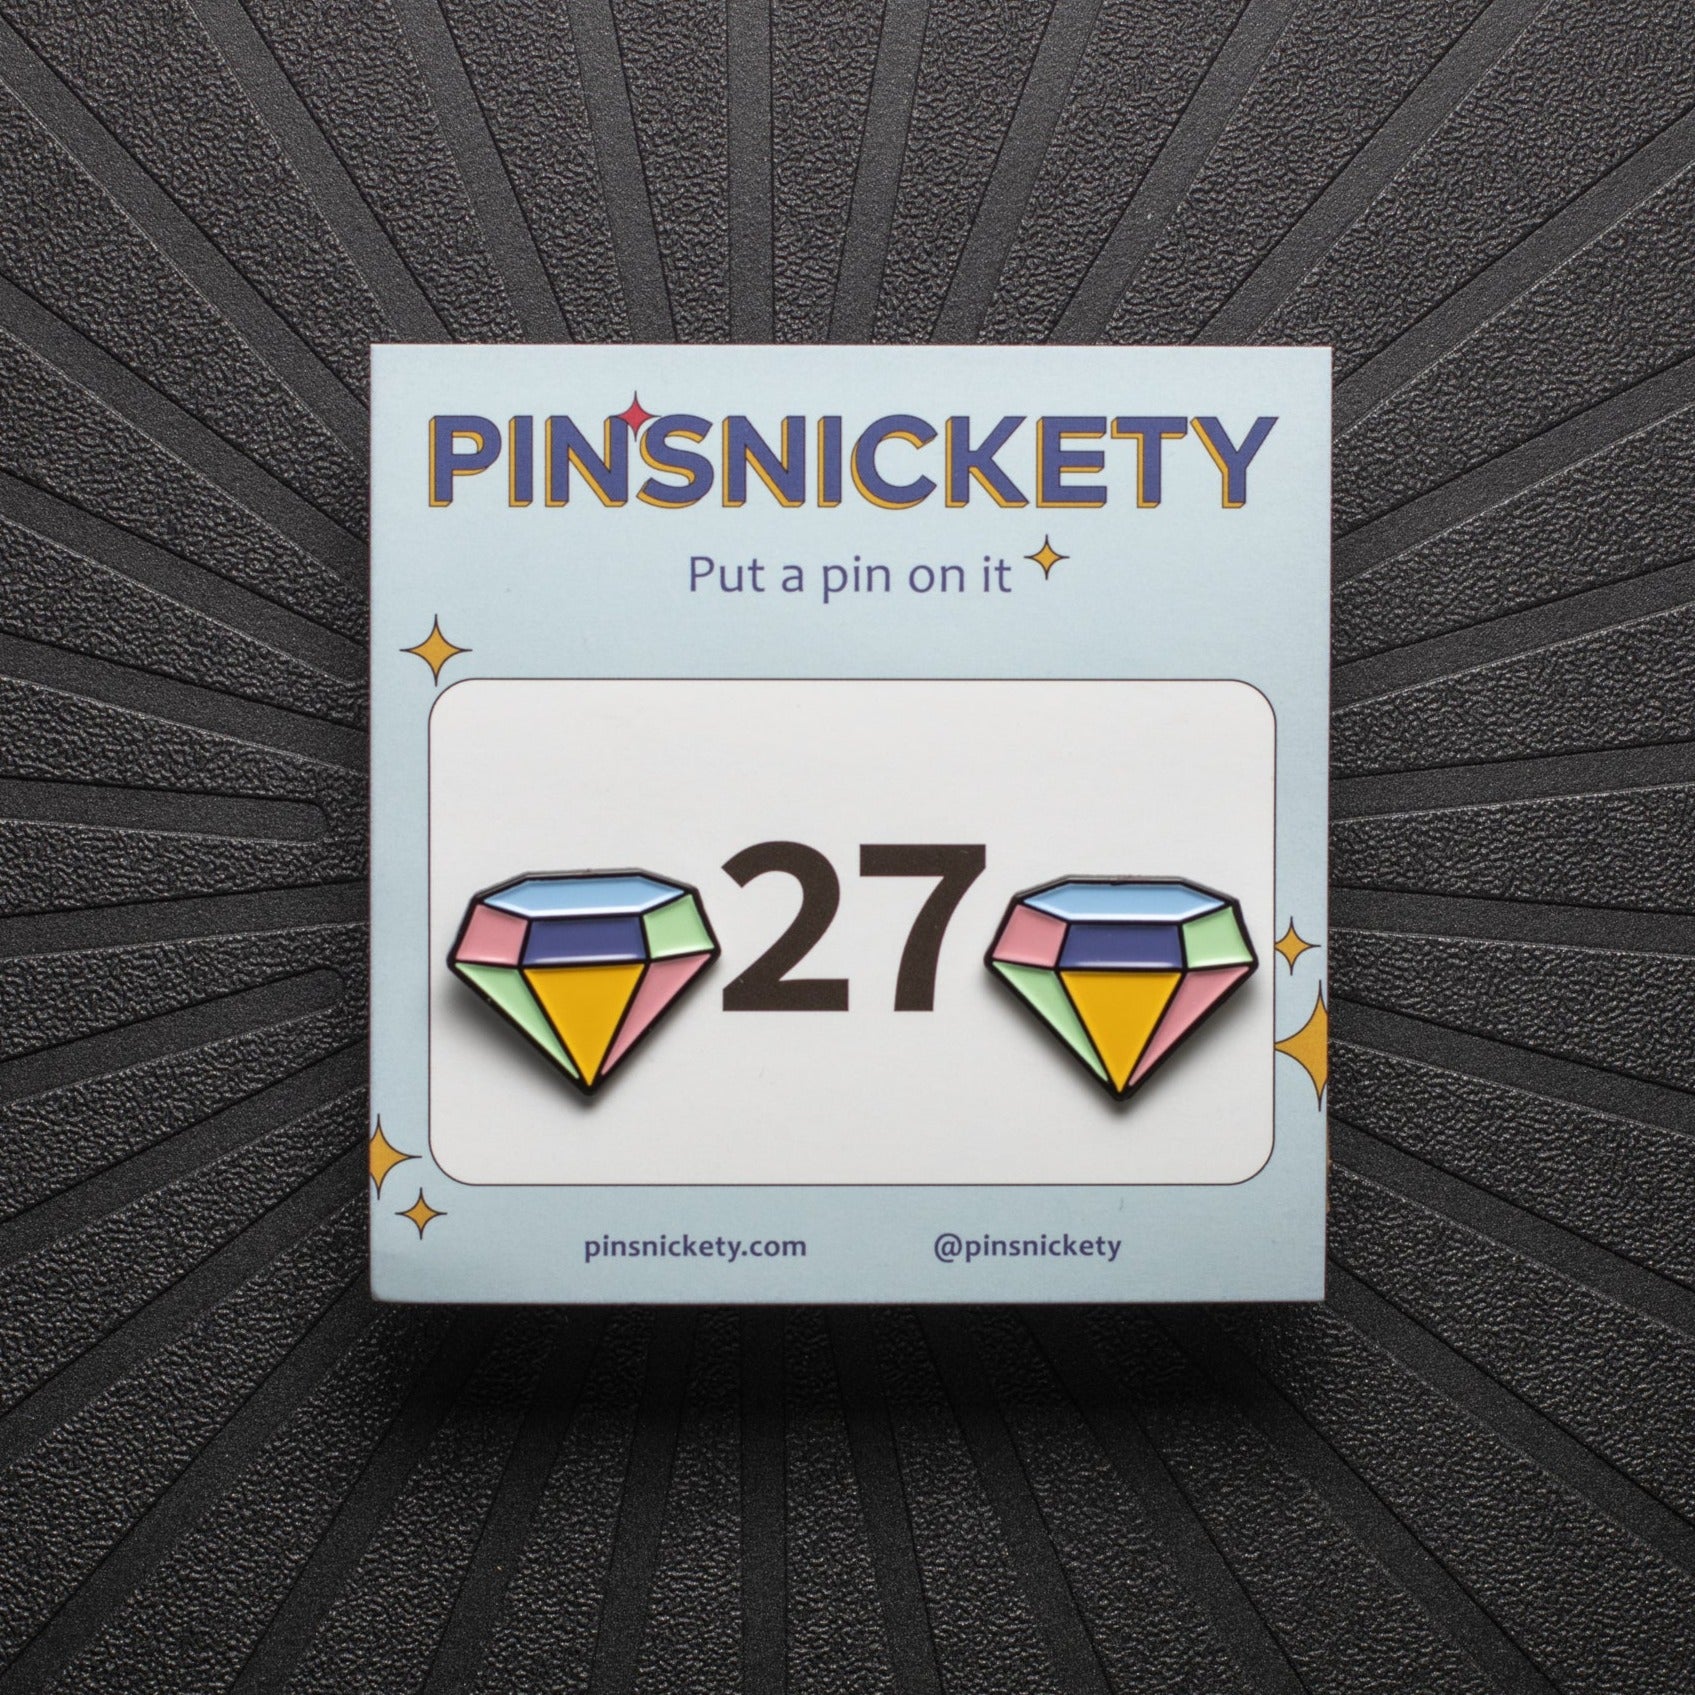 Pinsnickety gem horse show number pins on their product packaging card